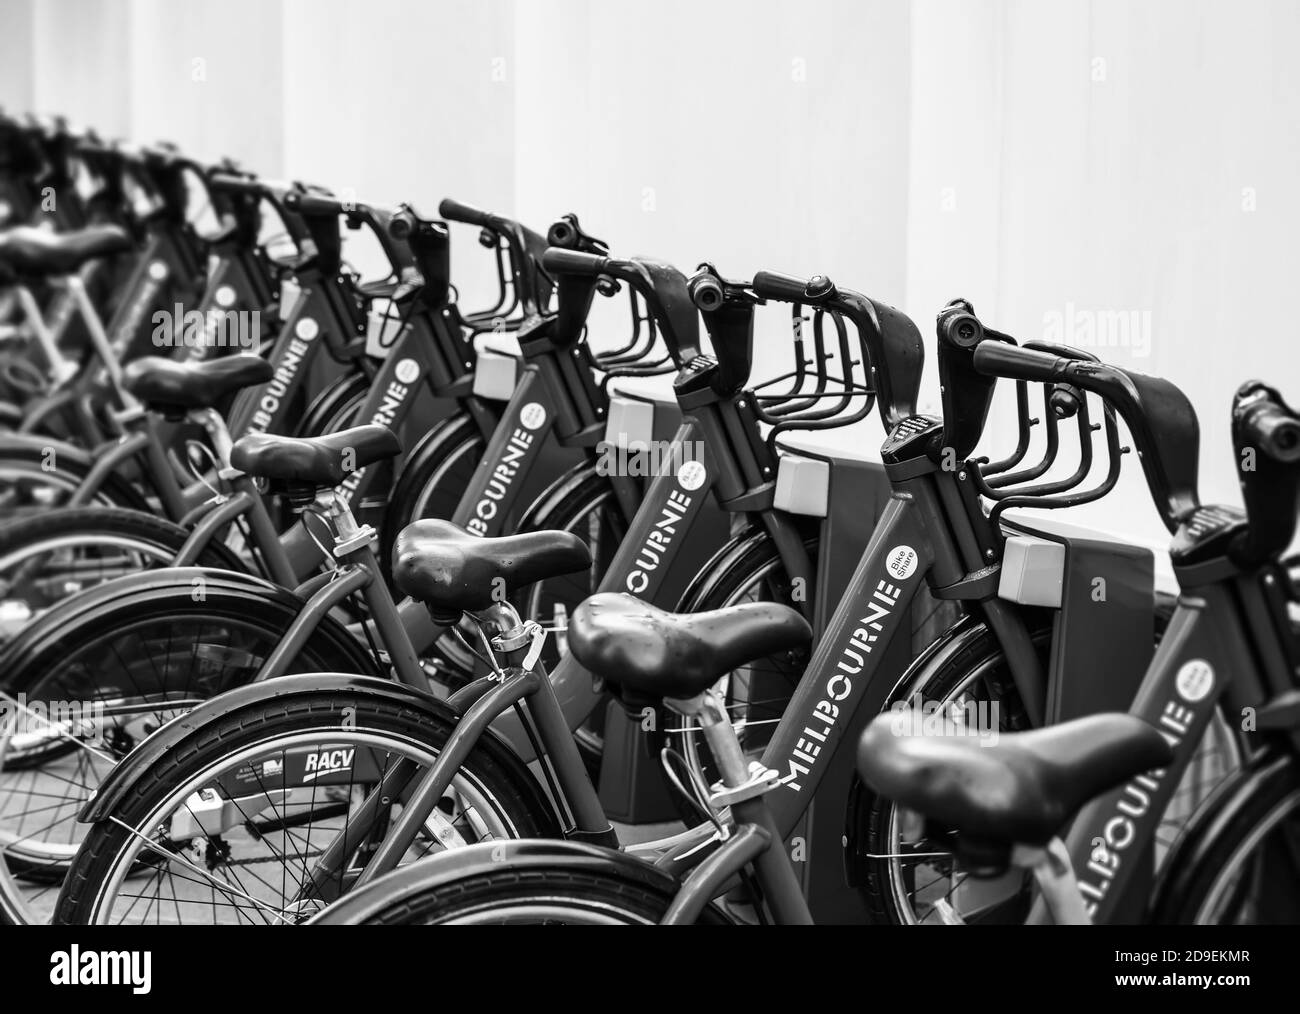 MELBOURNE, AUSTRALIA - DECEMBER 10, 2014: Melbourne Bike Share is a bicycle sharing system that serves the central business district of Melbourne. Bla Stock Photo